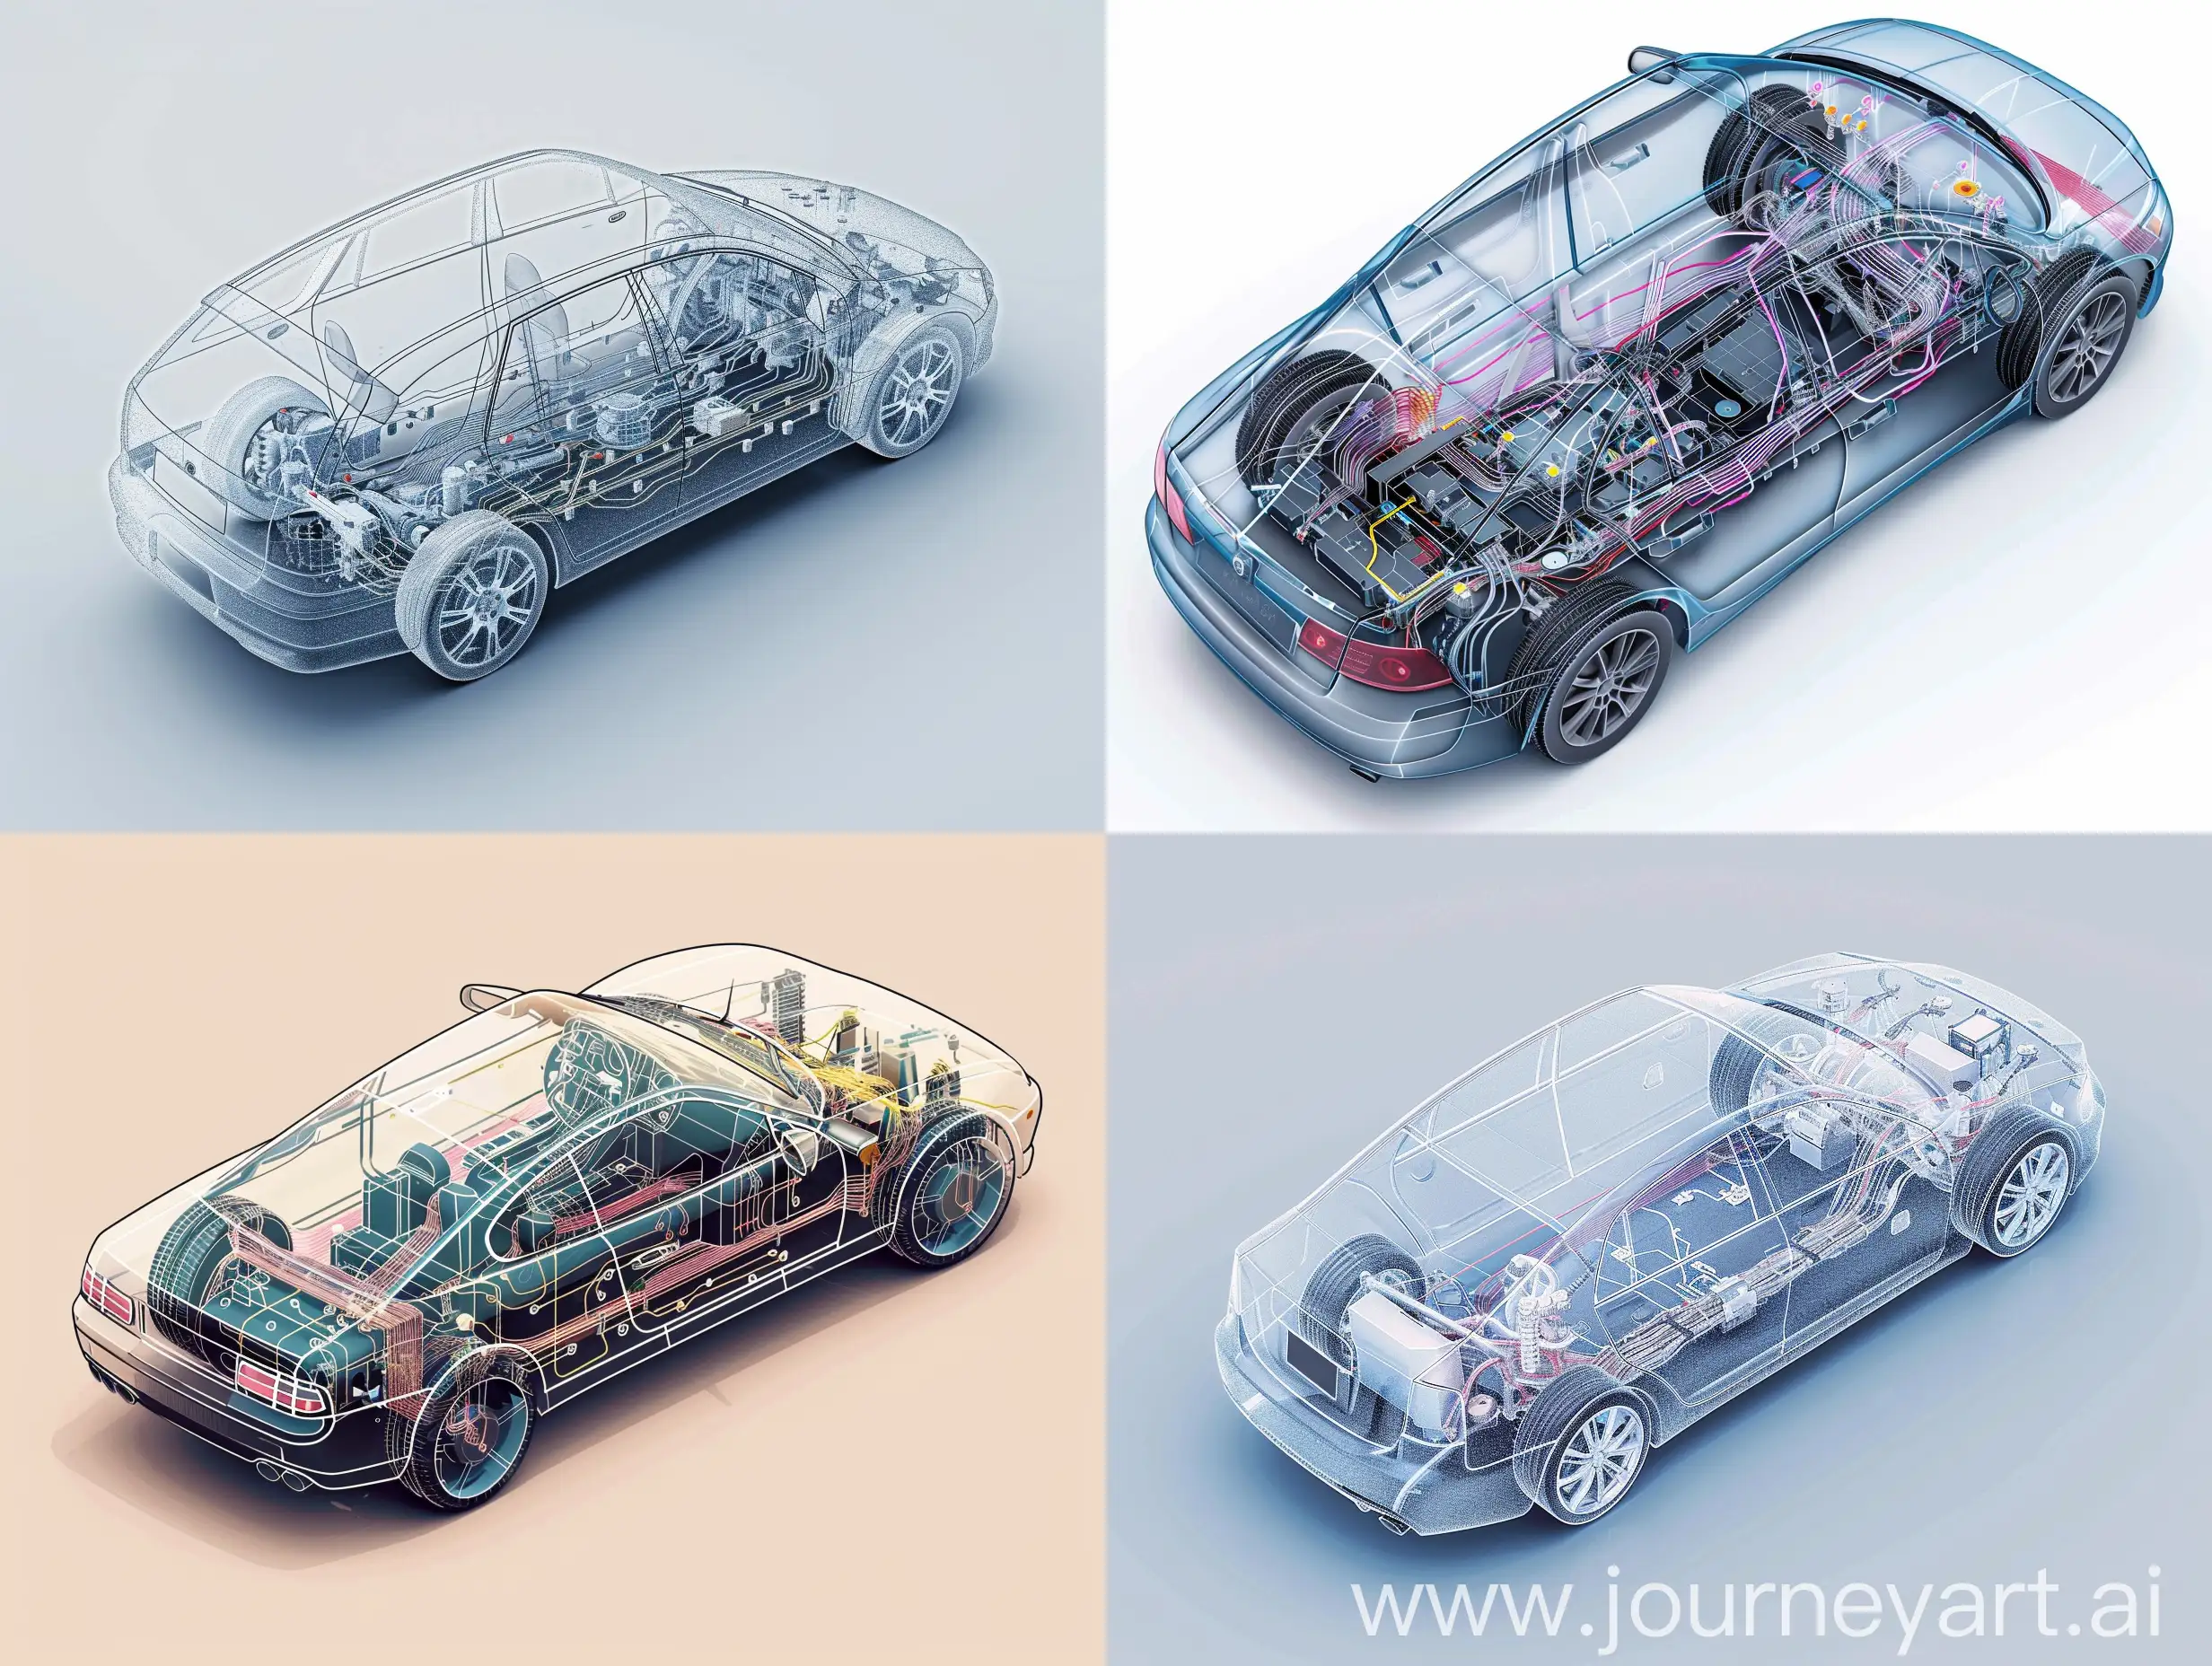 isometric car with transparent exterior panel showing intricate cabling that follows car contours